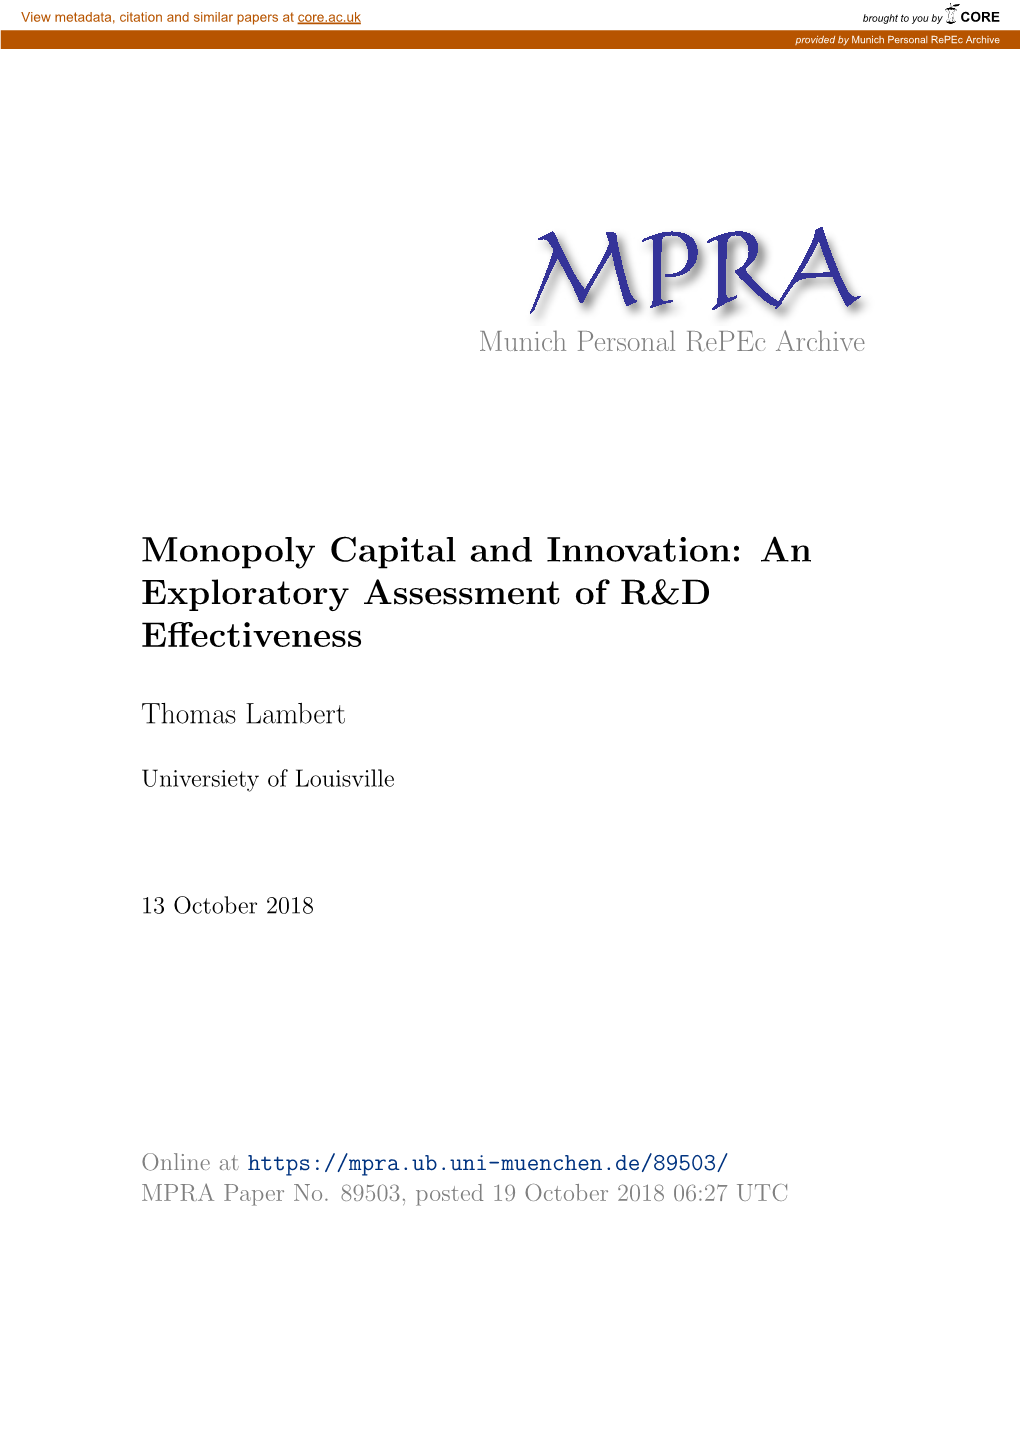 Monopoly Capital and Innovation: an Exploratory Assessment of R&D